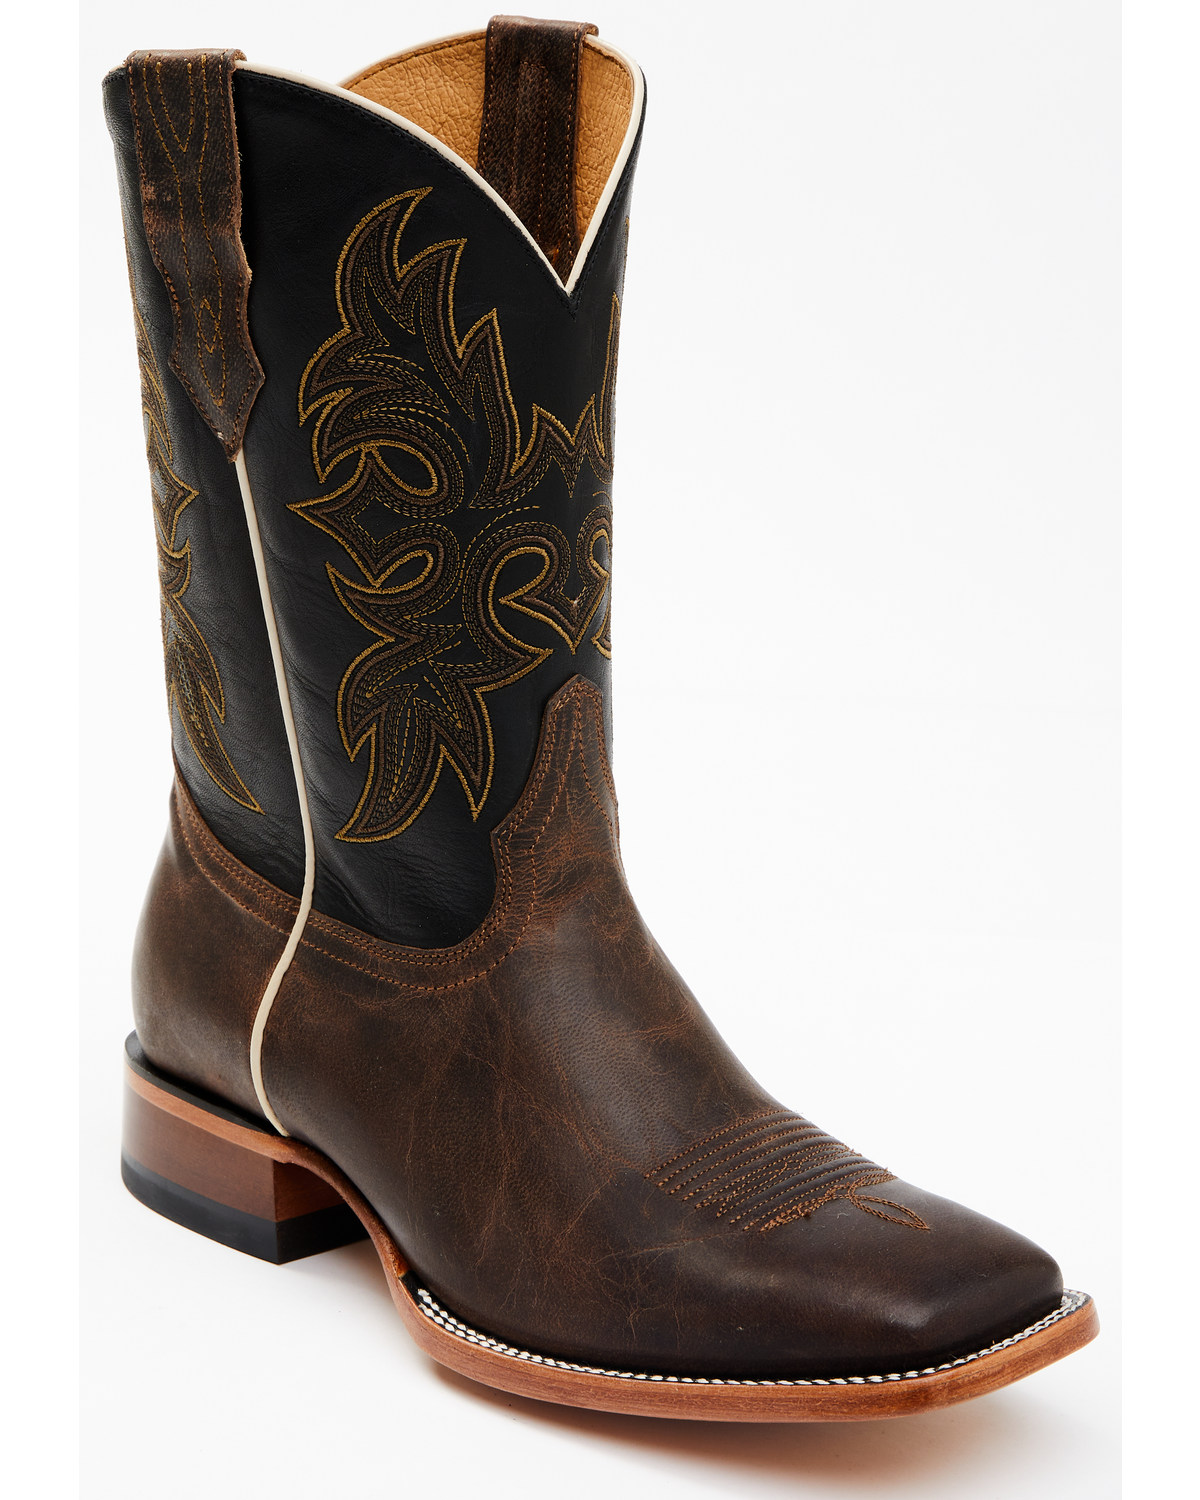 Cody James Men's Willow Western Boots - Broad Square Toe